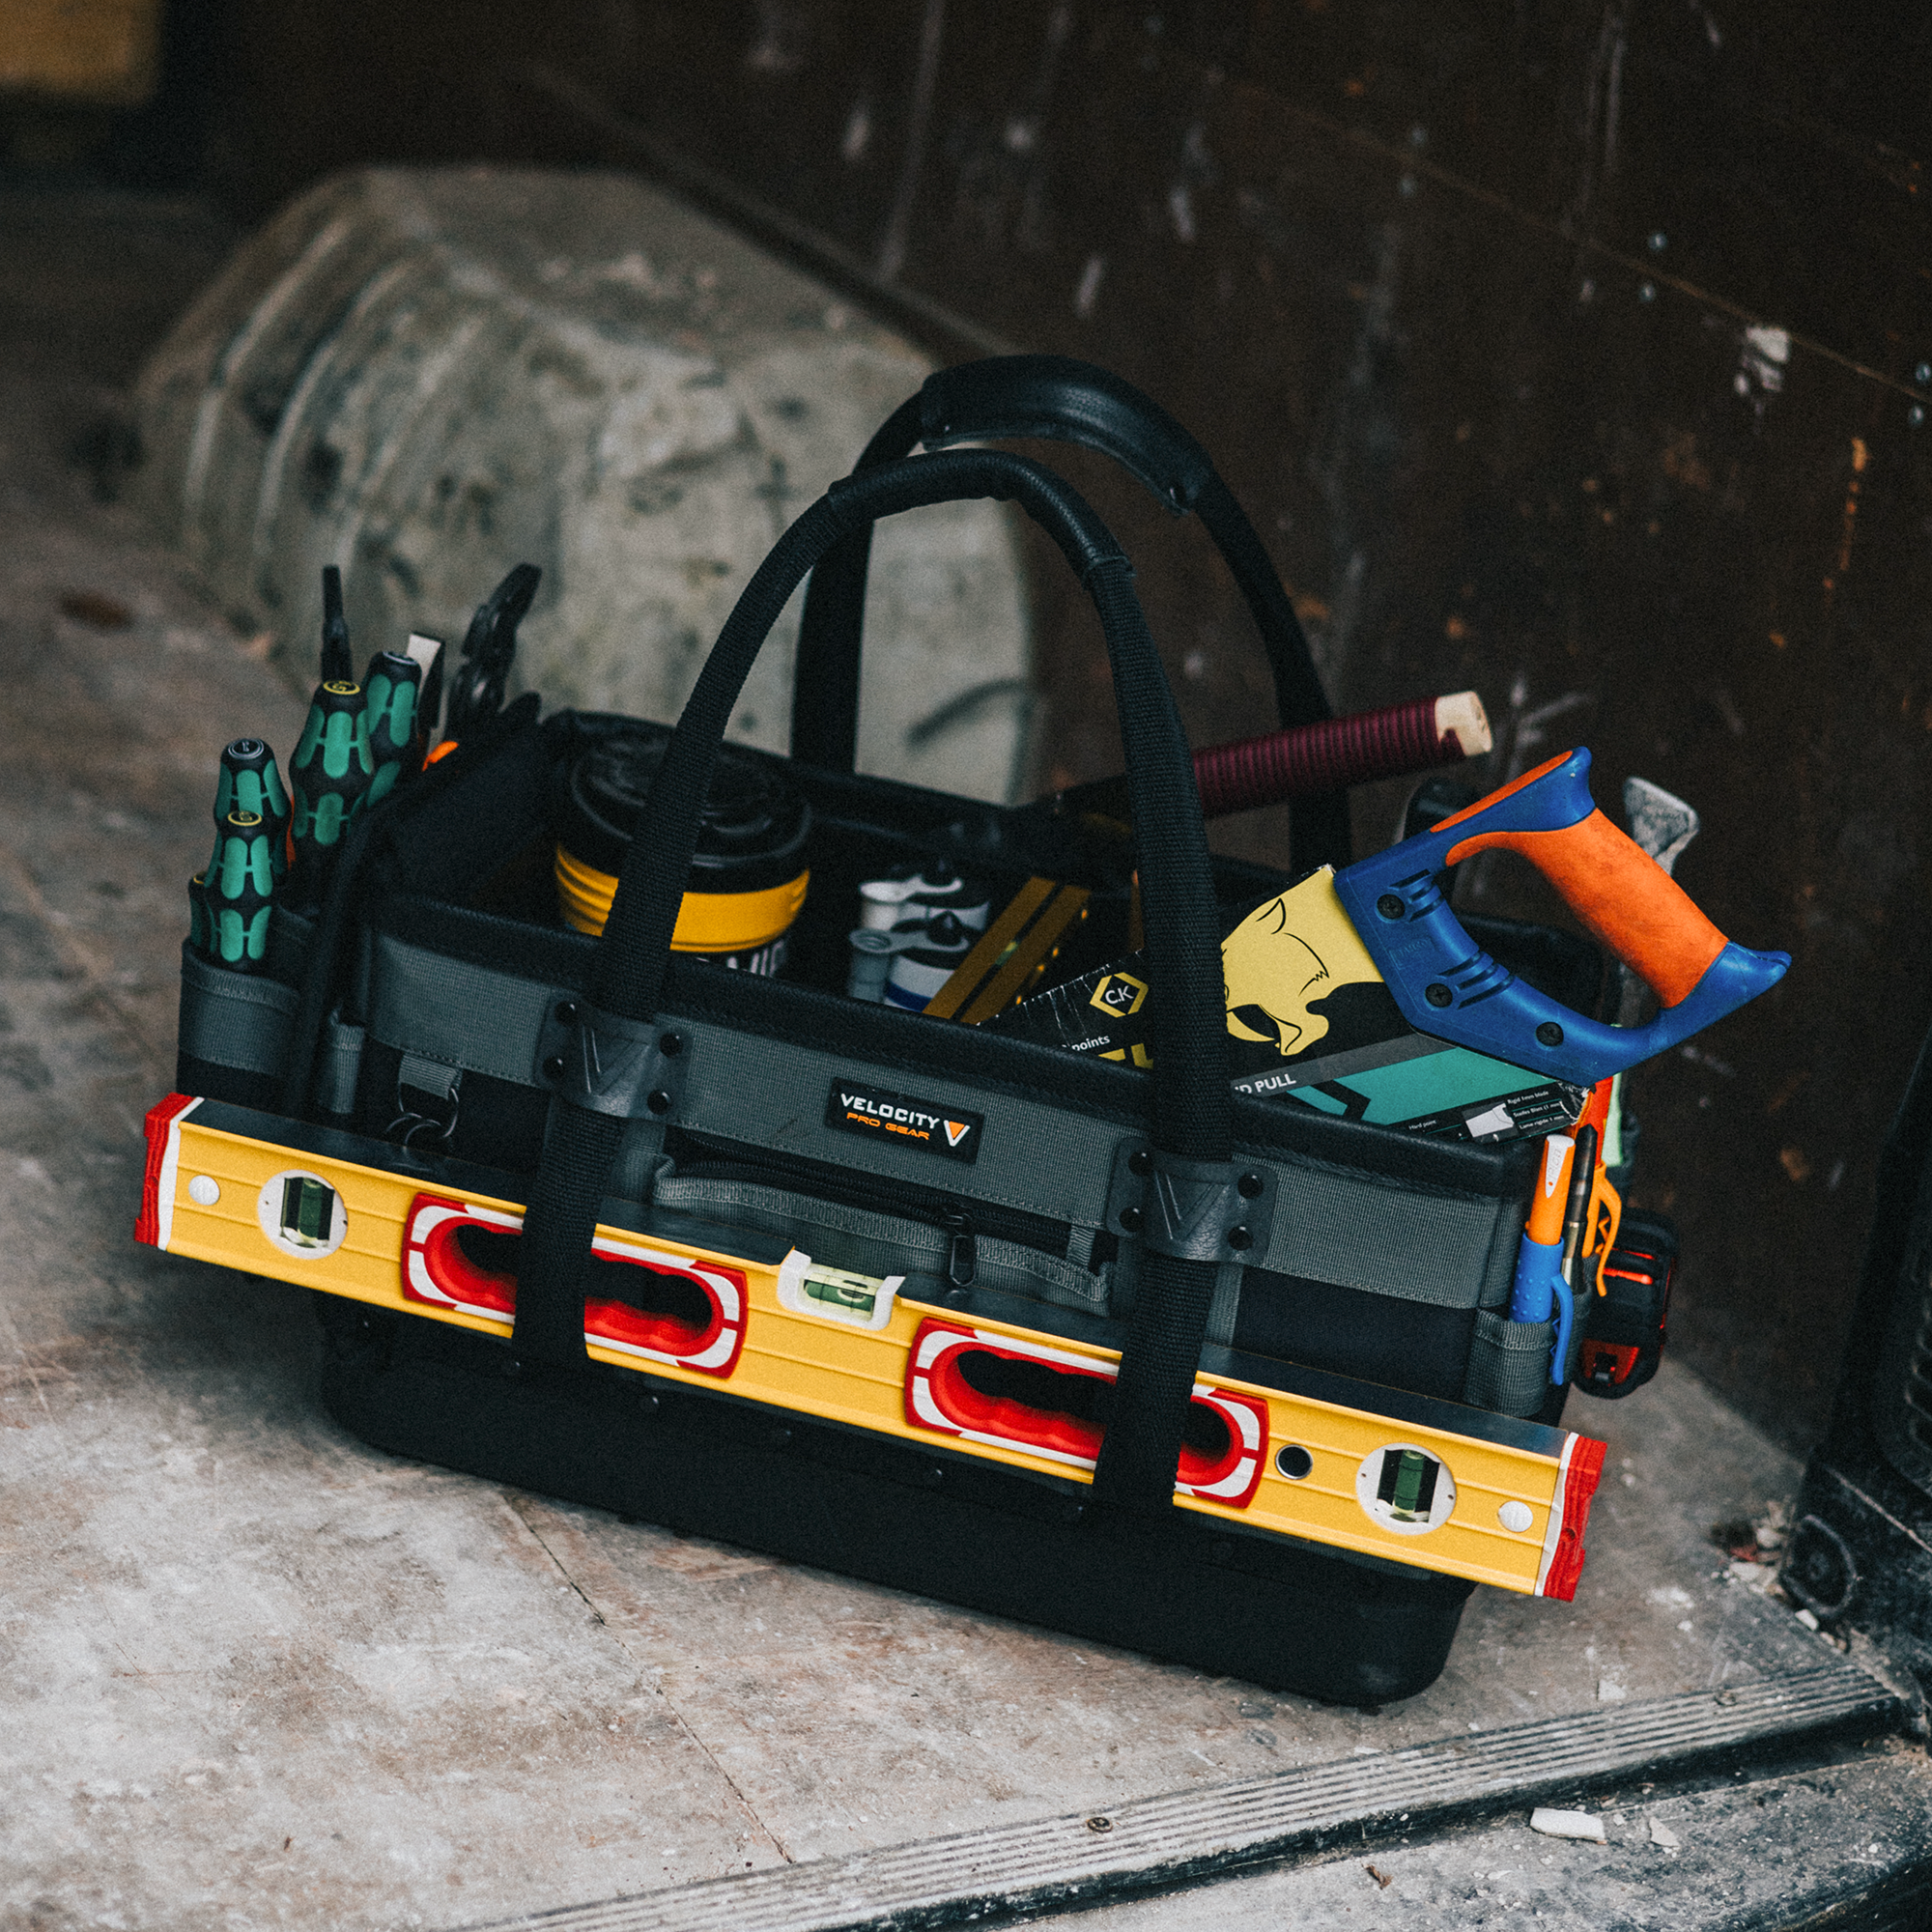 Rogue 11.0 Contractors tool bag loaded with tools like wera and a stabila level, in the back of a van